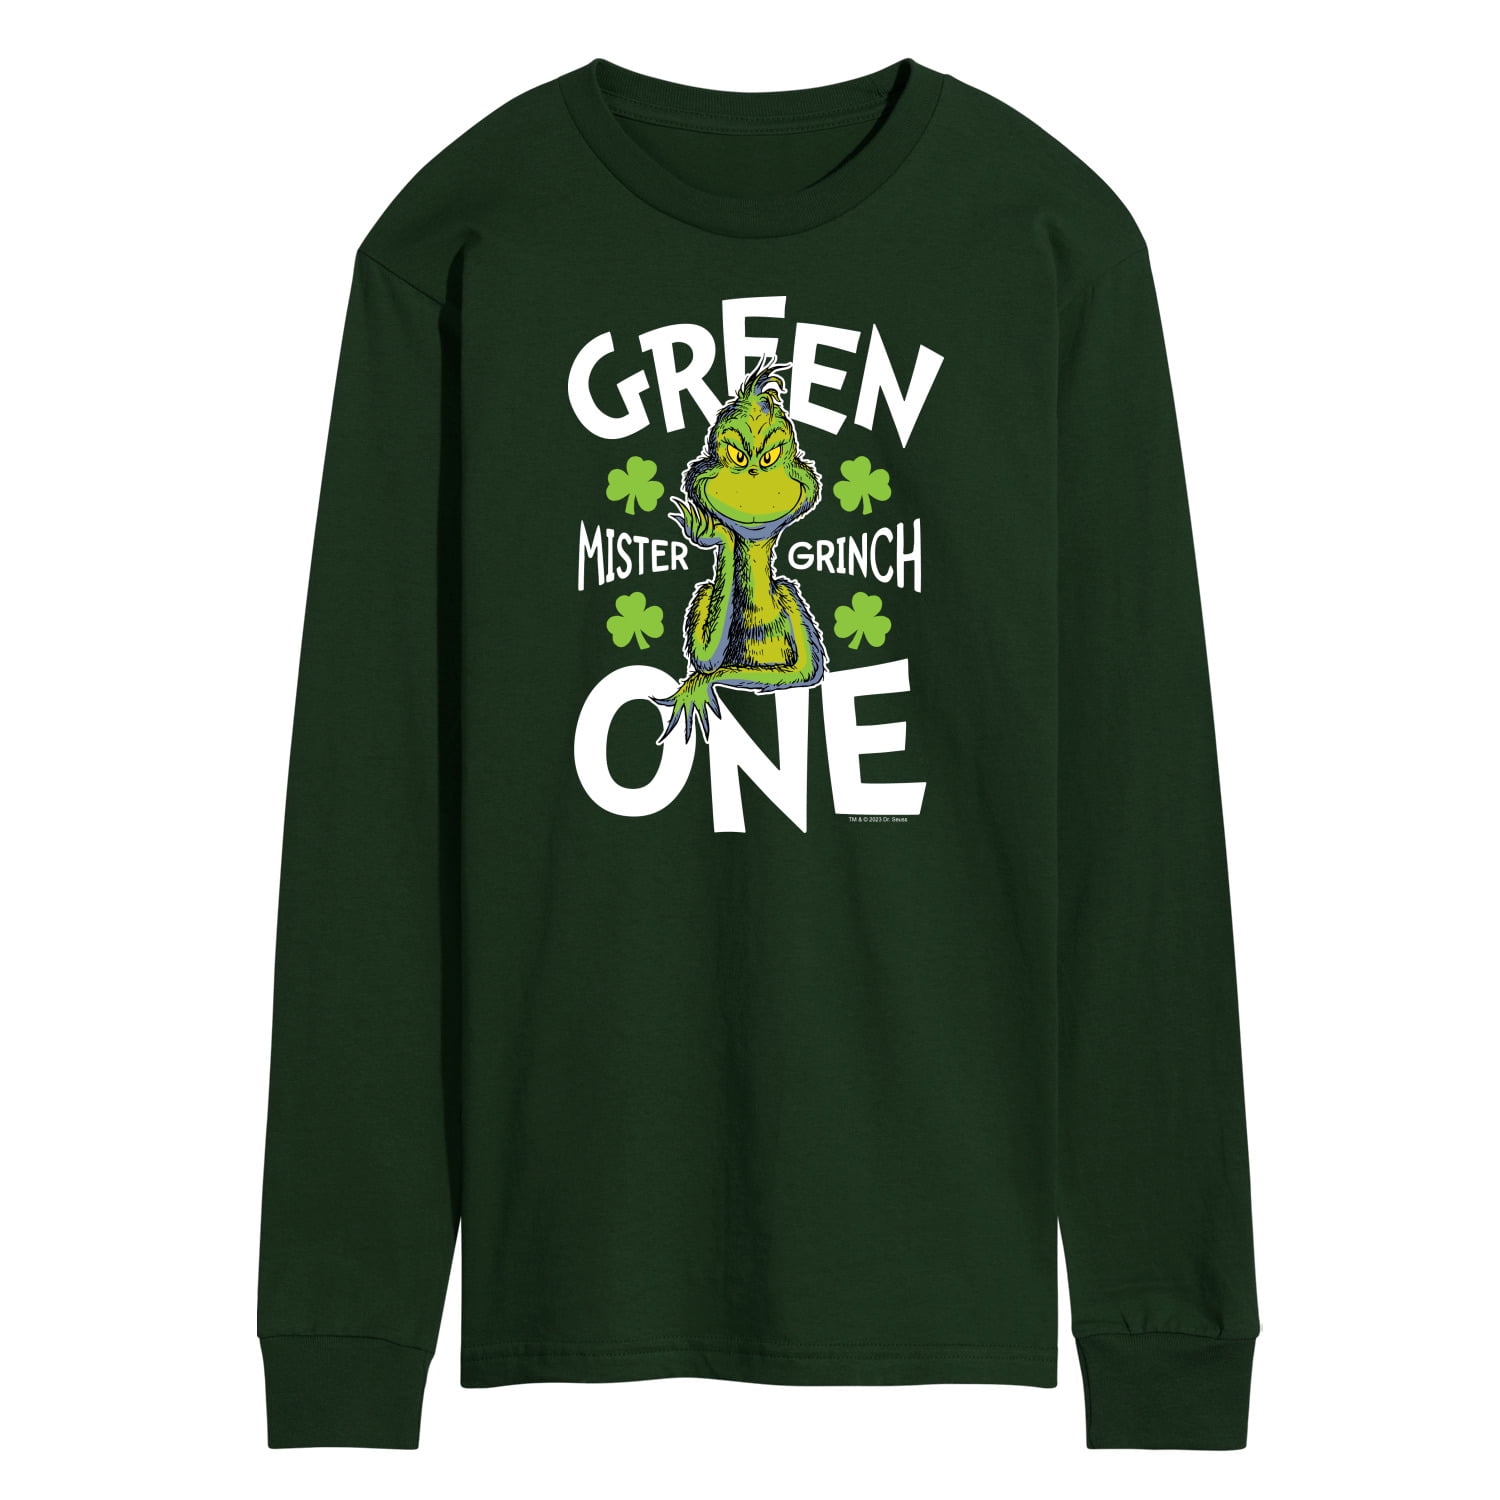 The Grinch - Green One - Men's Long Sleeve T-Shirt